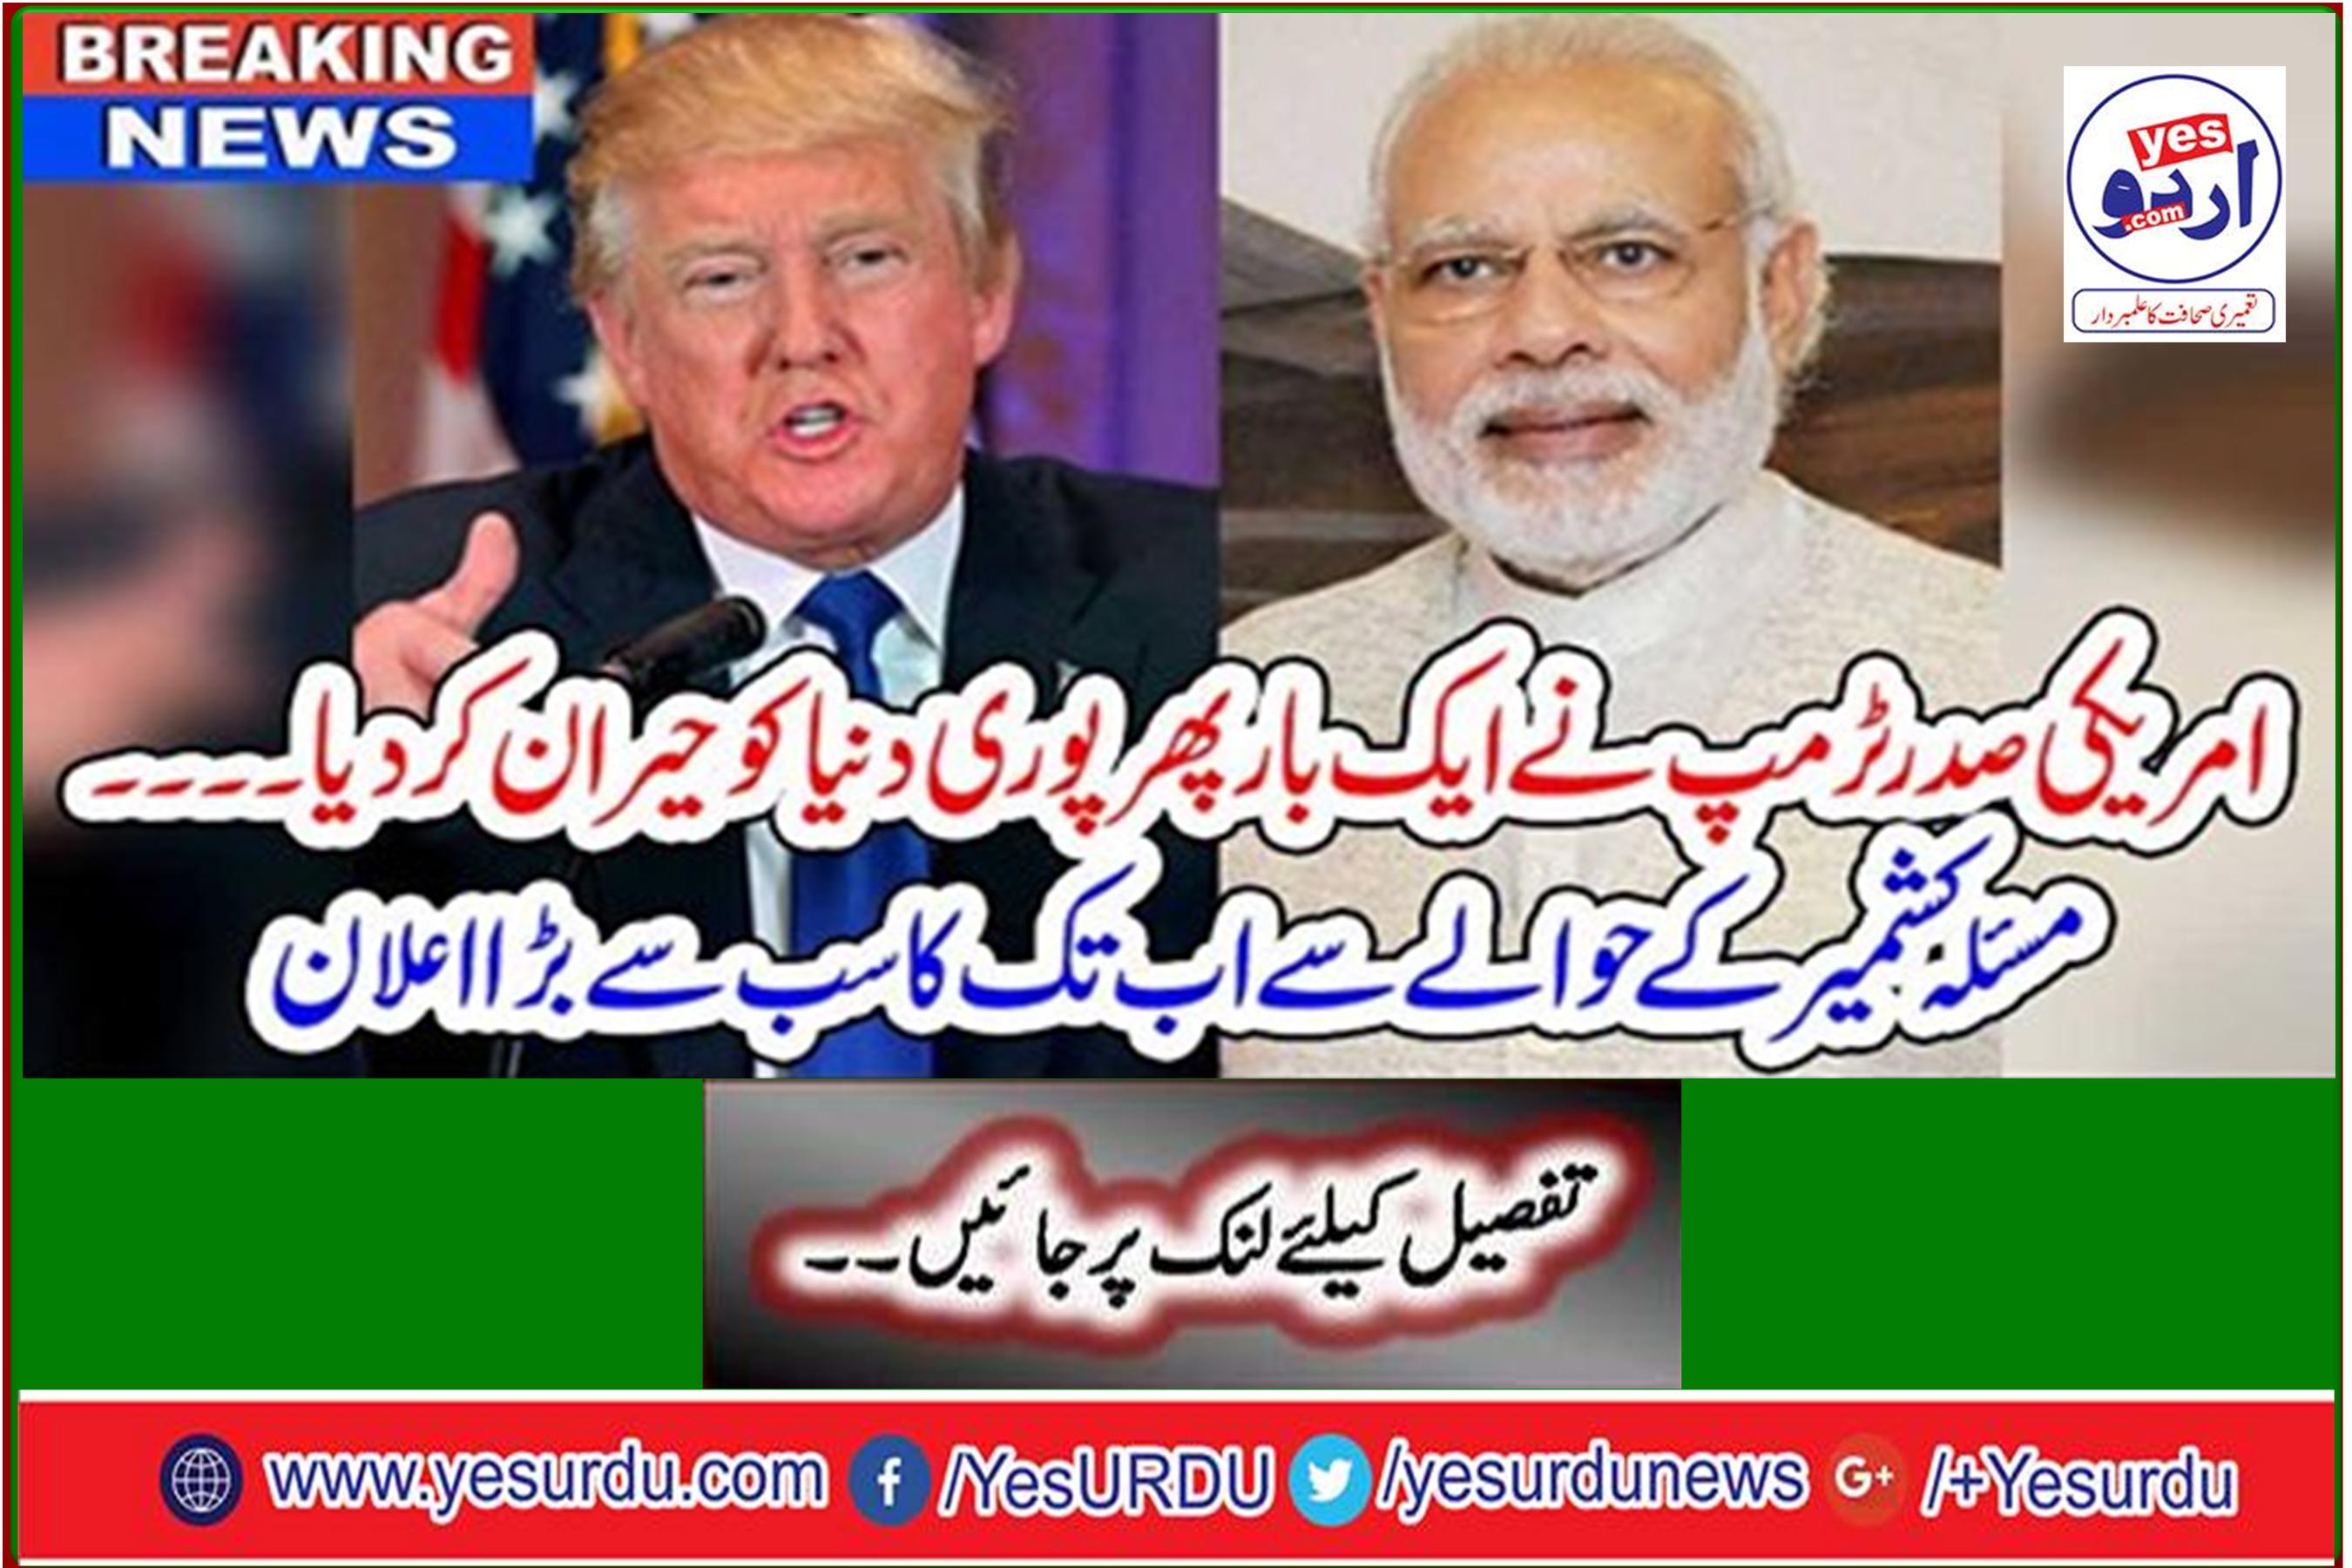 Breaking News: US President Trump once again shocked the whole world ... the biggest announcement ever regarding Kashmir issue